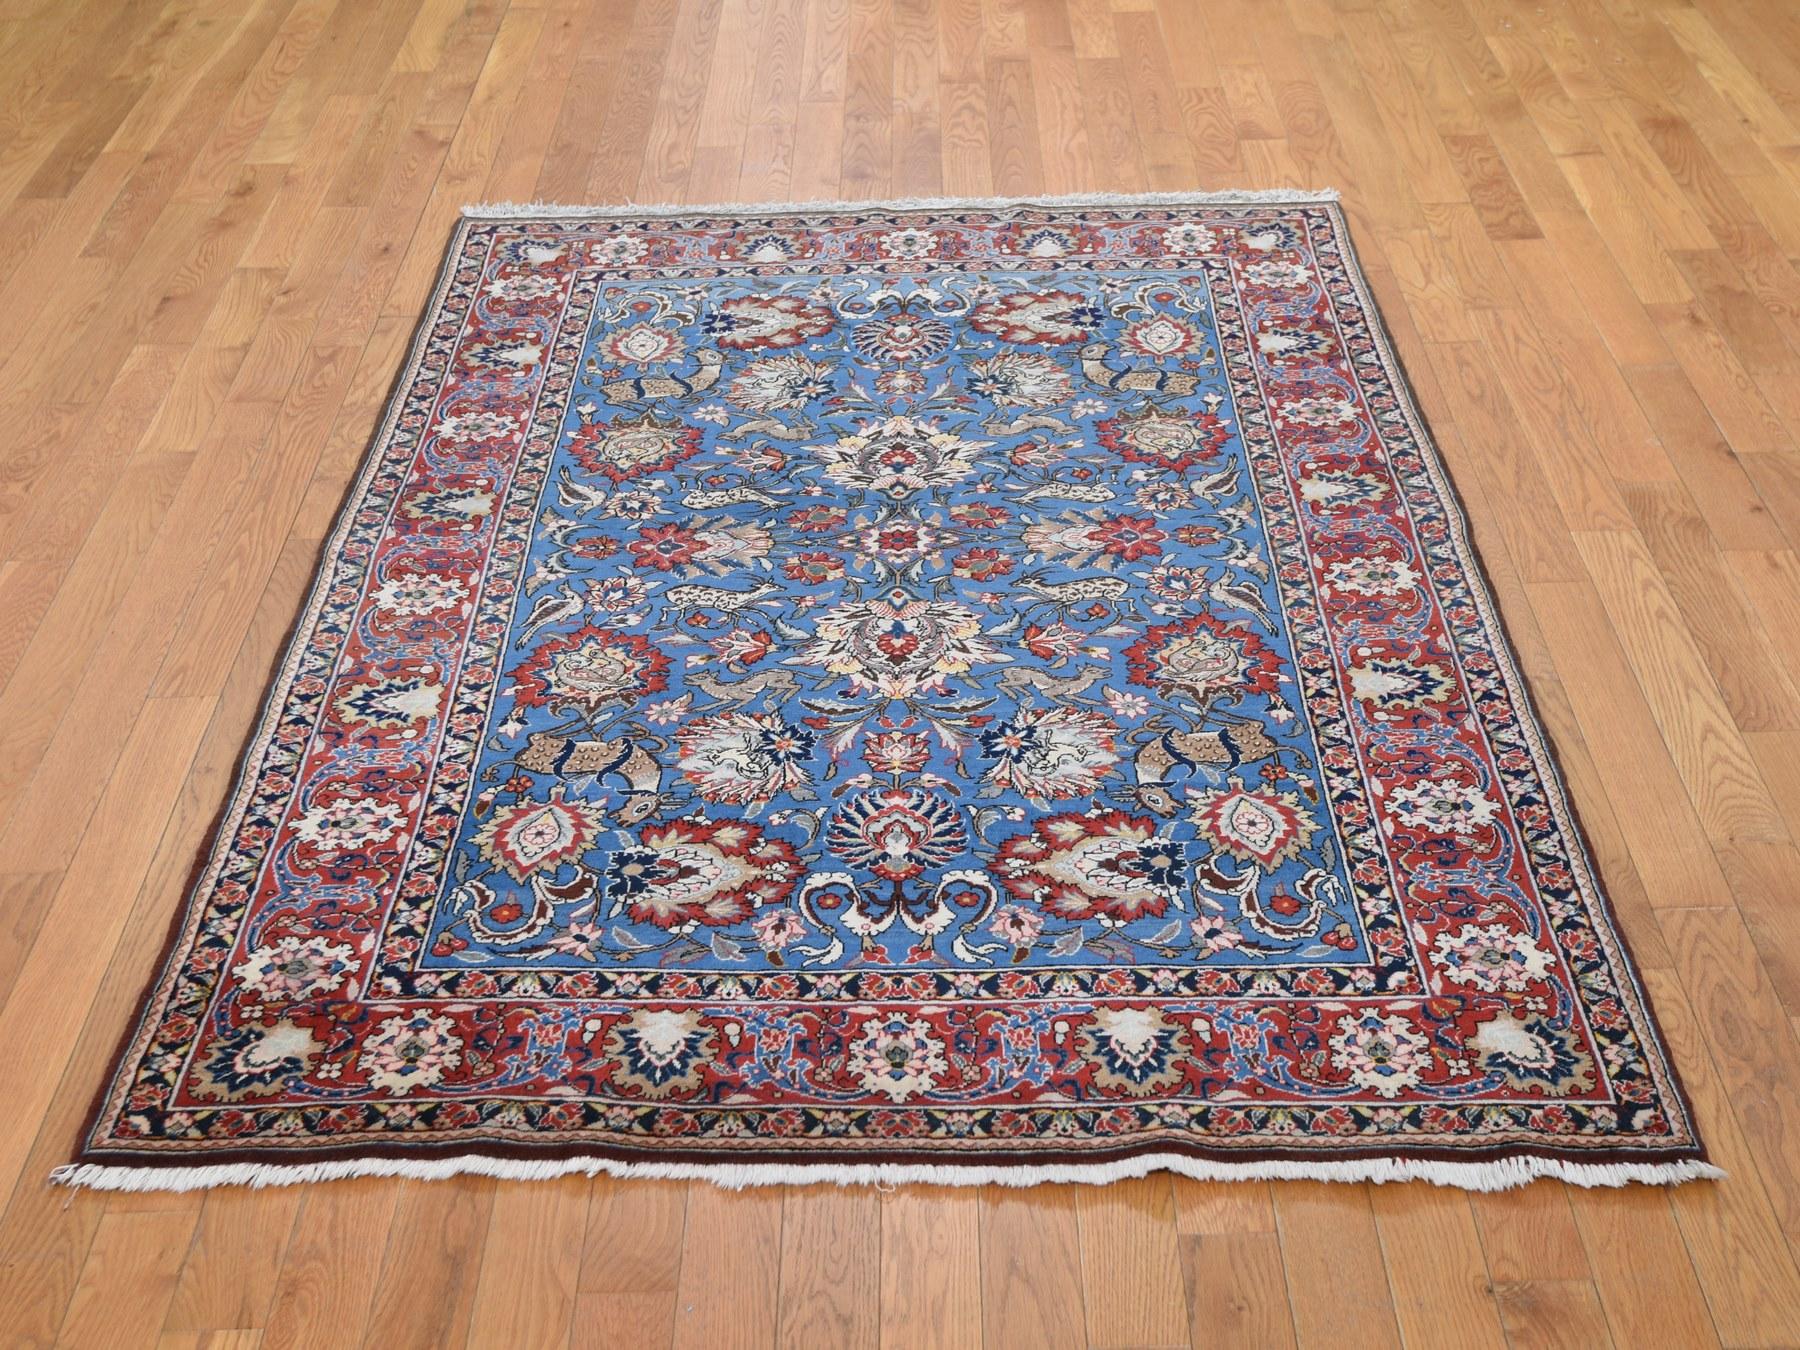 This is a truly genuine one-of-a-kind blue vintage Persian Qum full pile excellent condition hand knotted rug. It has been knotted for months and months in the centuries-old Persian weaving craftsmanship techniques by expert artisans. 

Primary